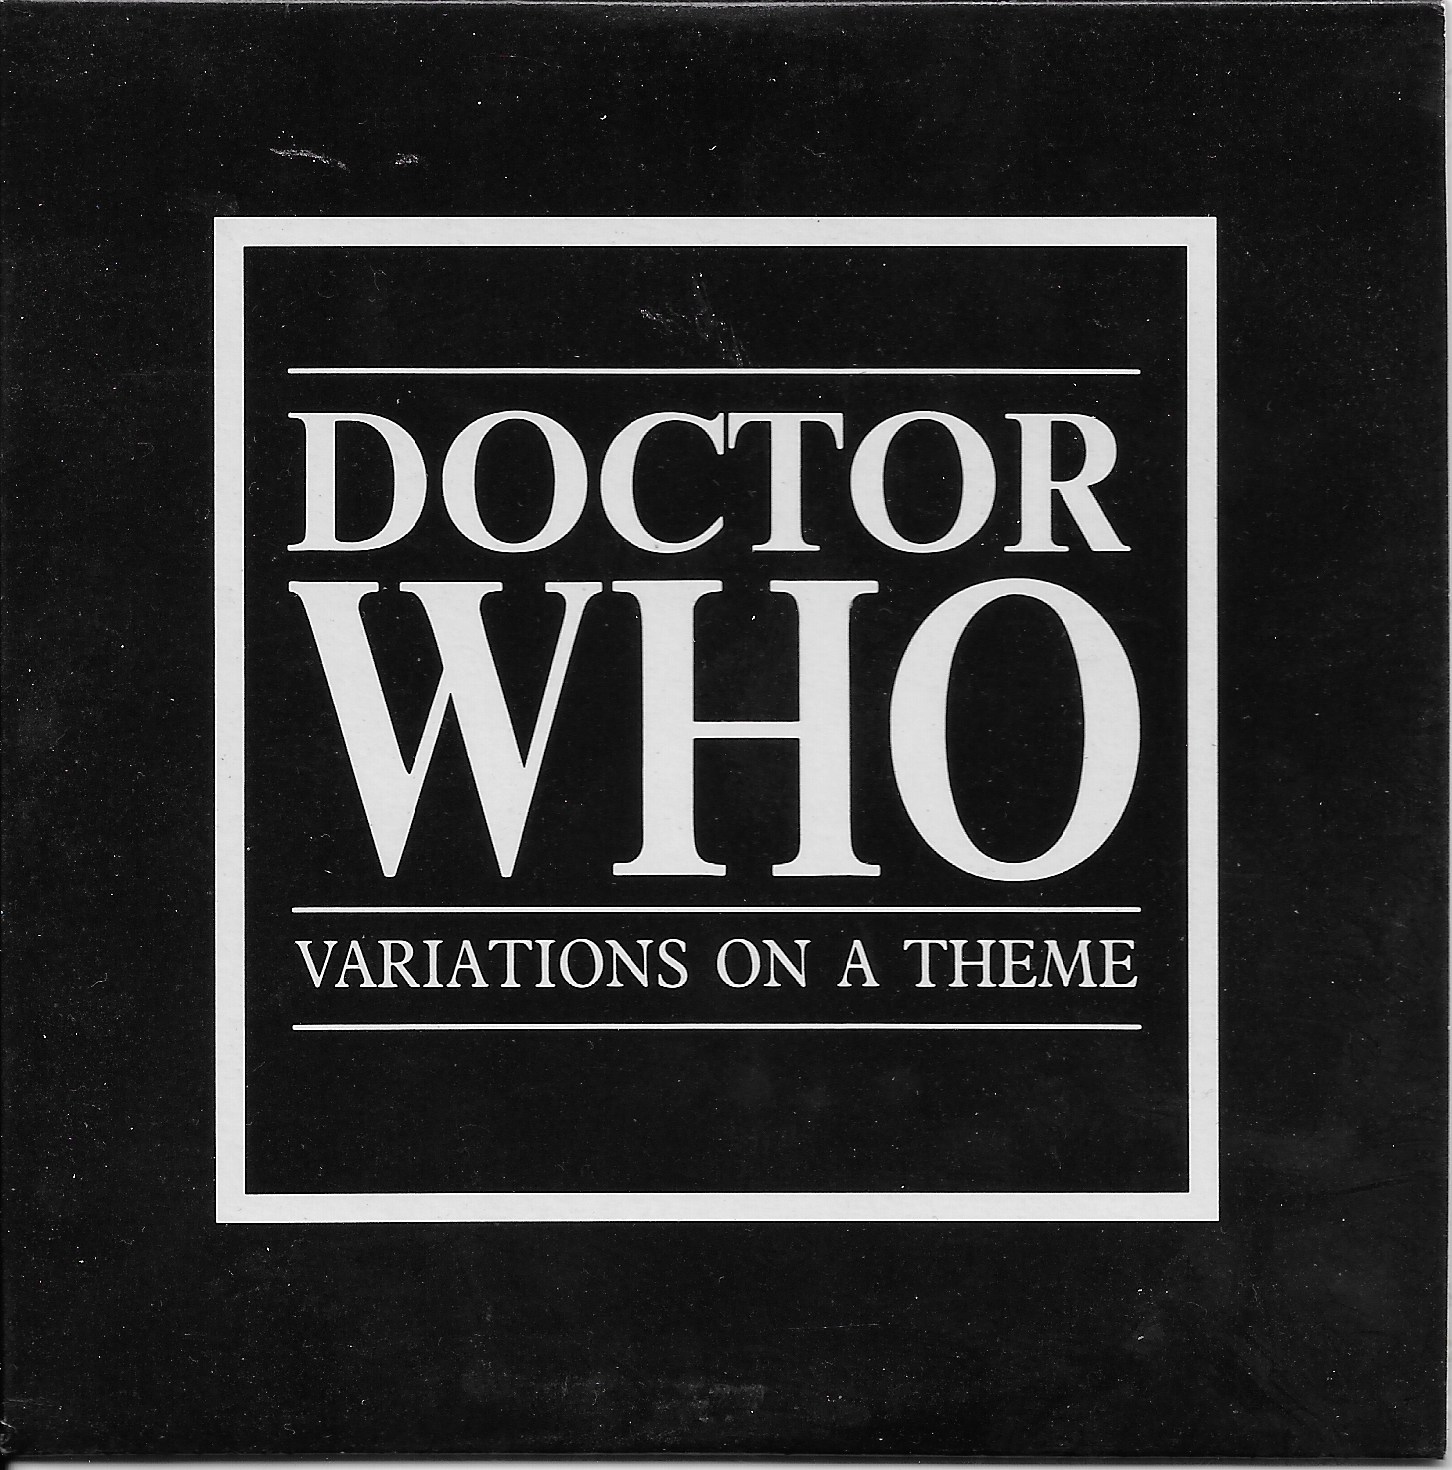 Picture of CD MMI - 4 C Doctor Who - Variations on a theme by artist Ron Grainer from the BBC records and Tapes library